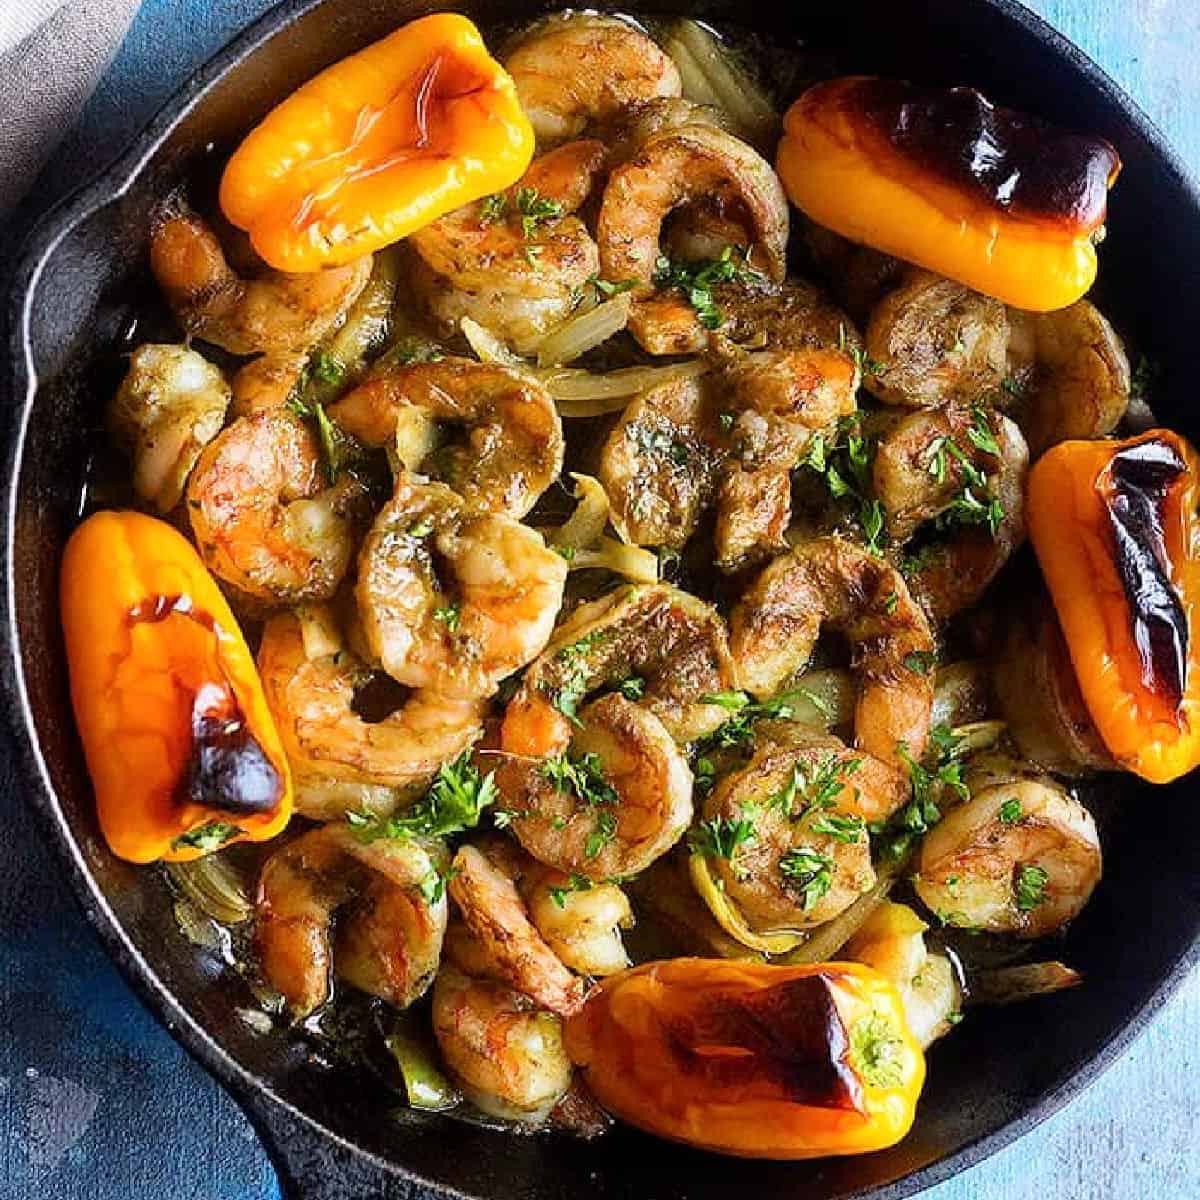 Baked shrimp flavored with chermoula sauce is so delicious and easy to make. You can serve it with white or brown rice.
